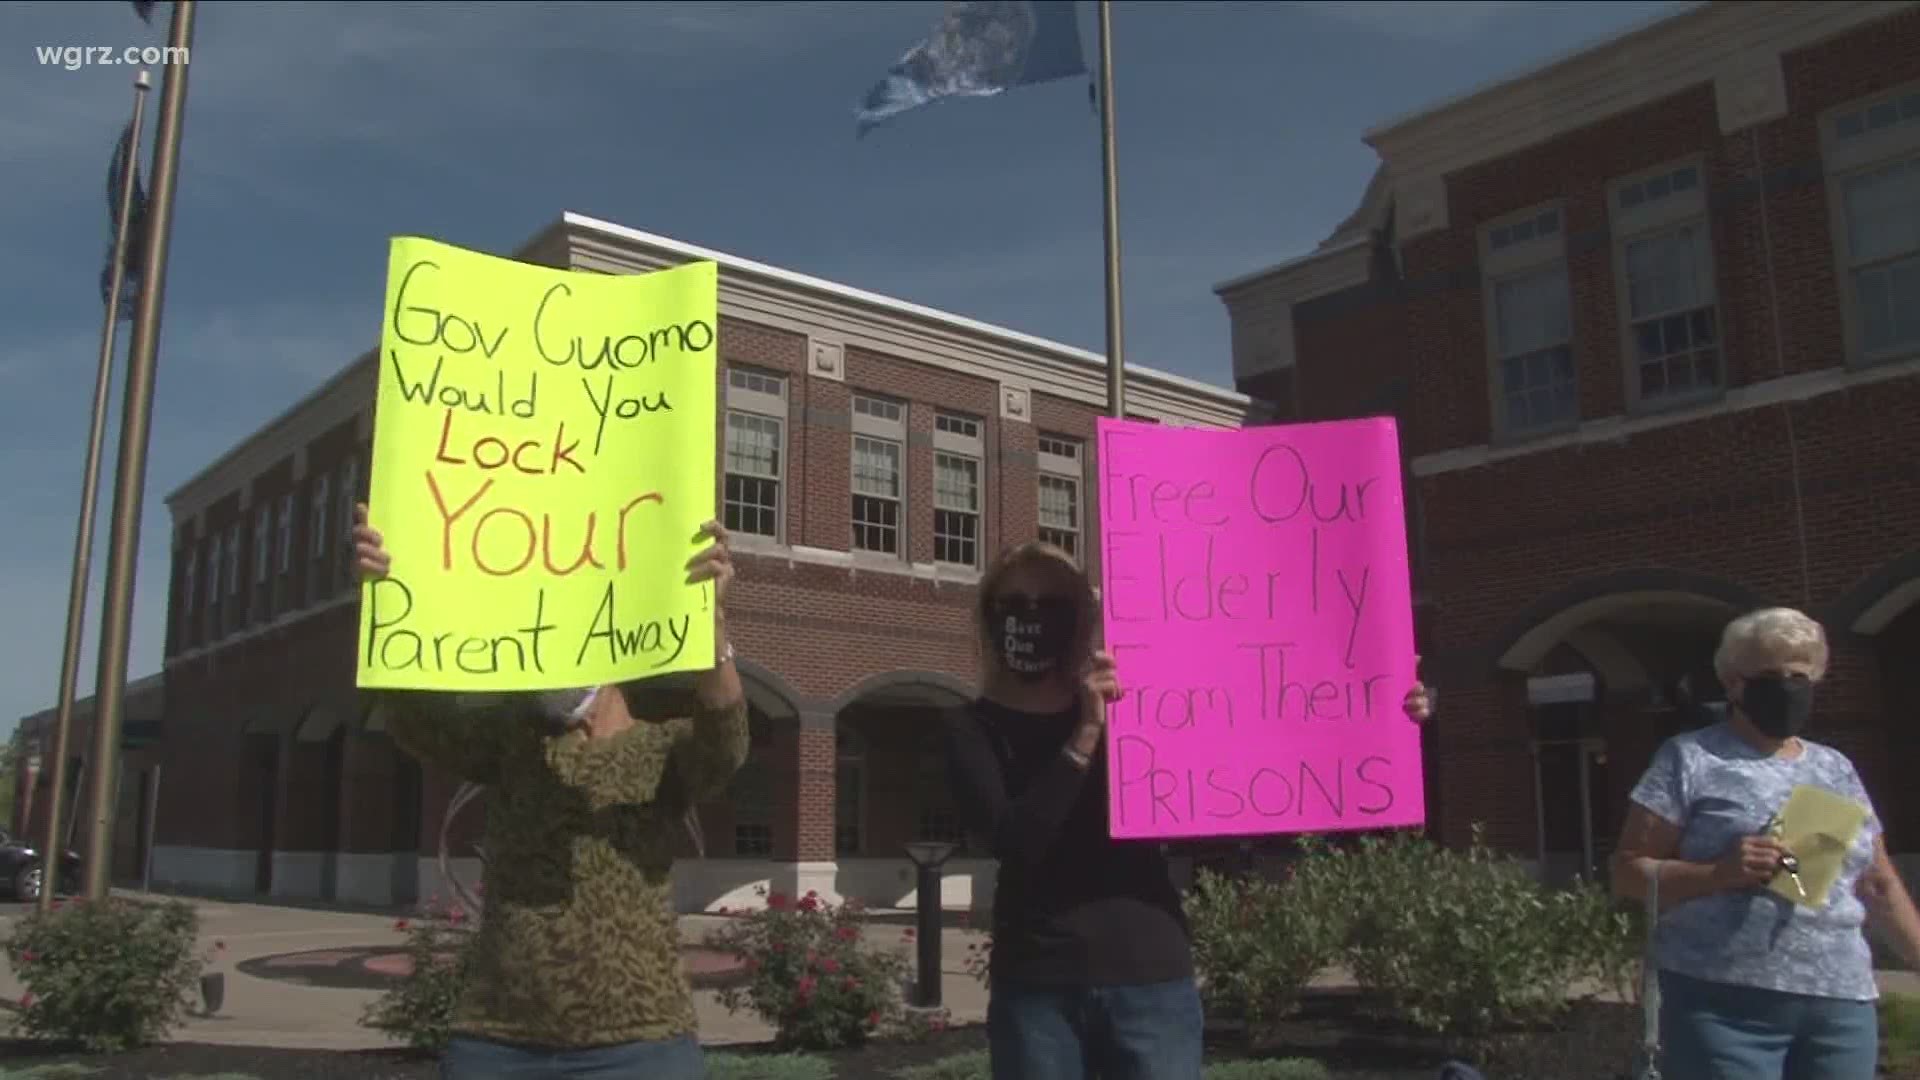 A protest in front of Batavia City Hall this morning.  Friends and family want visitation polices changed so they can see loved ones in nursing homes.